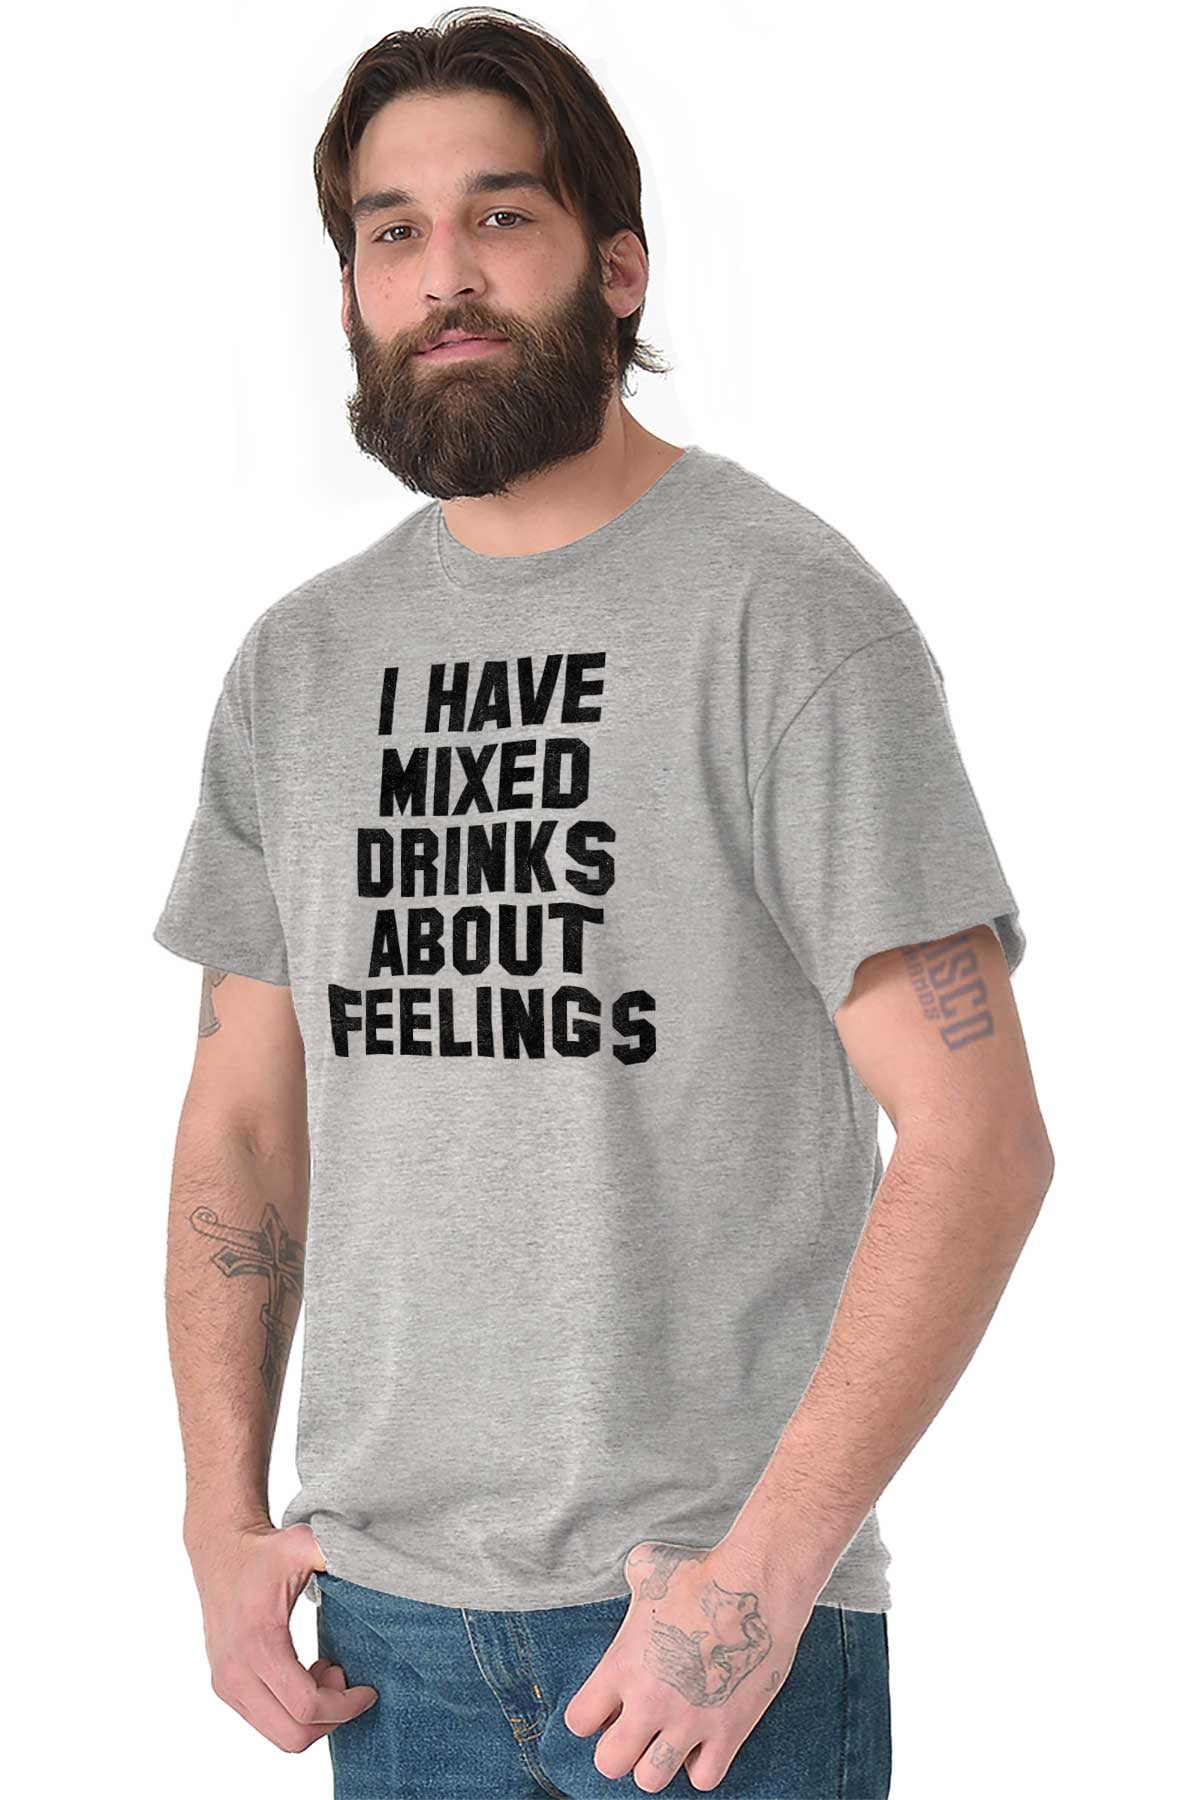 I Have Mixed Drinks About Feelings Funny T Shirt Alcohol Beer Party Tee 